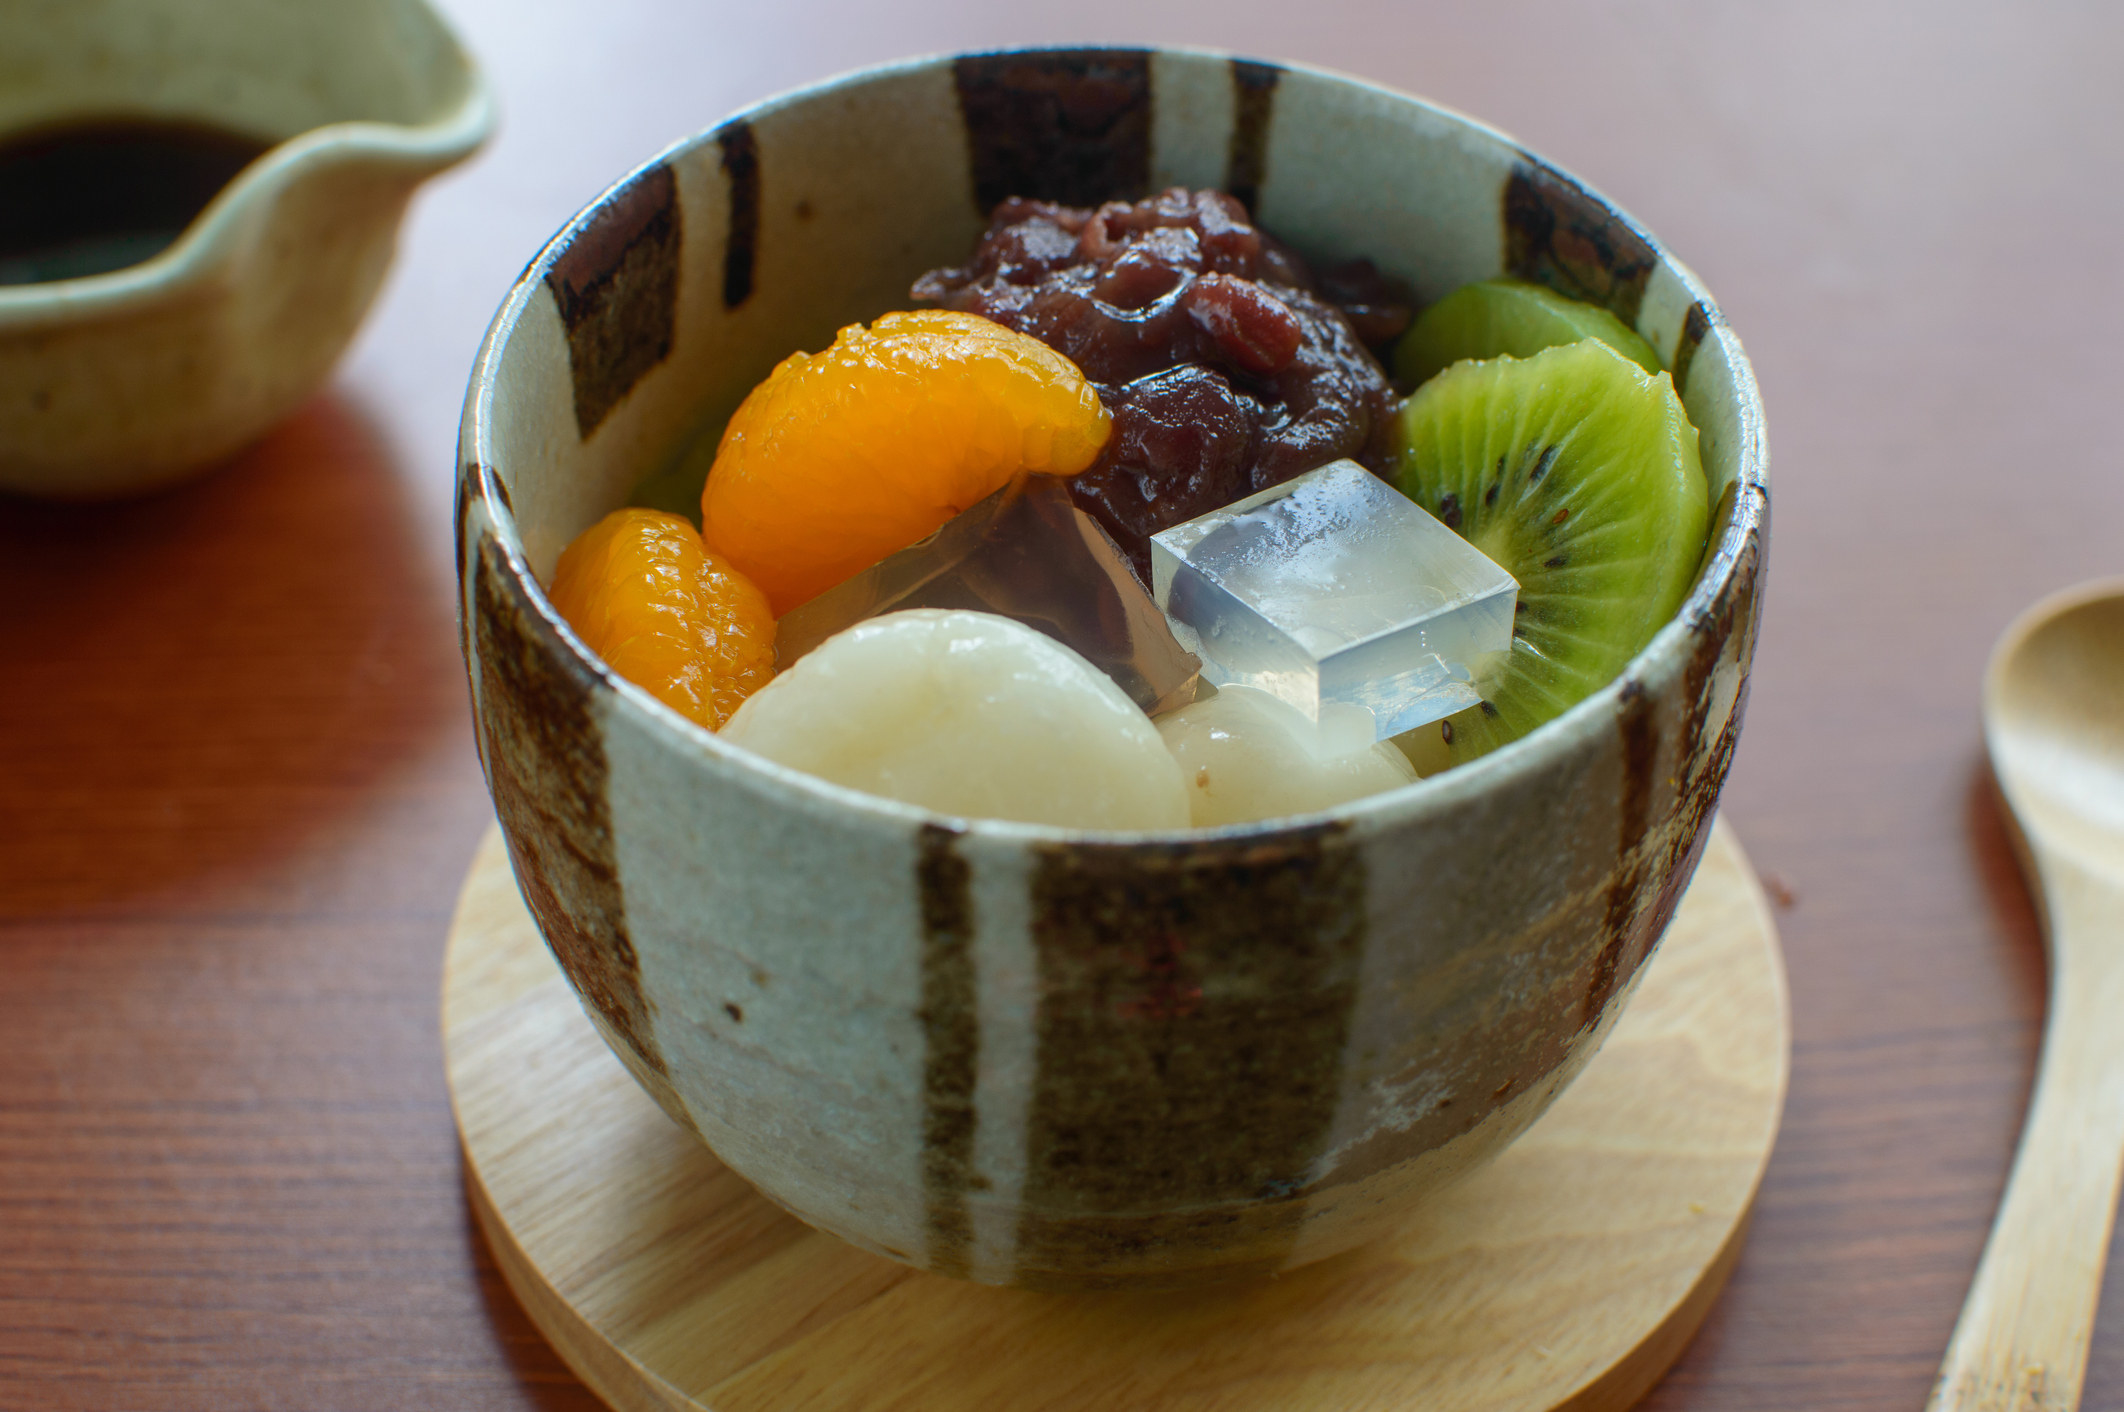 A bowl of small cubes of agar jelly, red bean paste, mochi, and some fruit